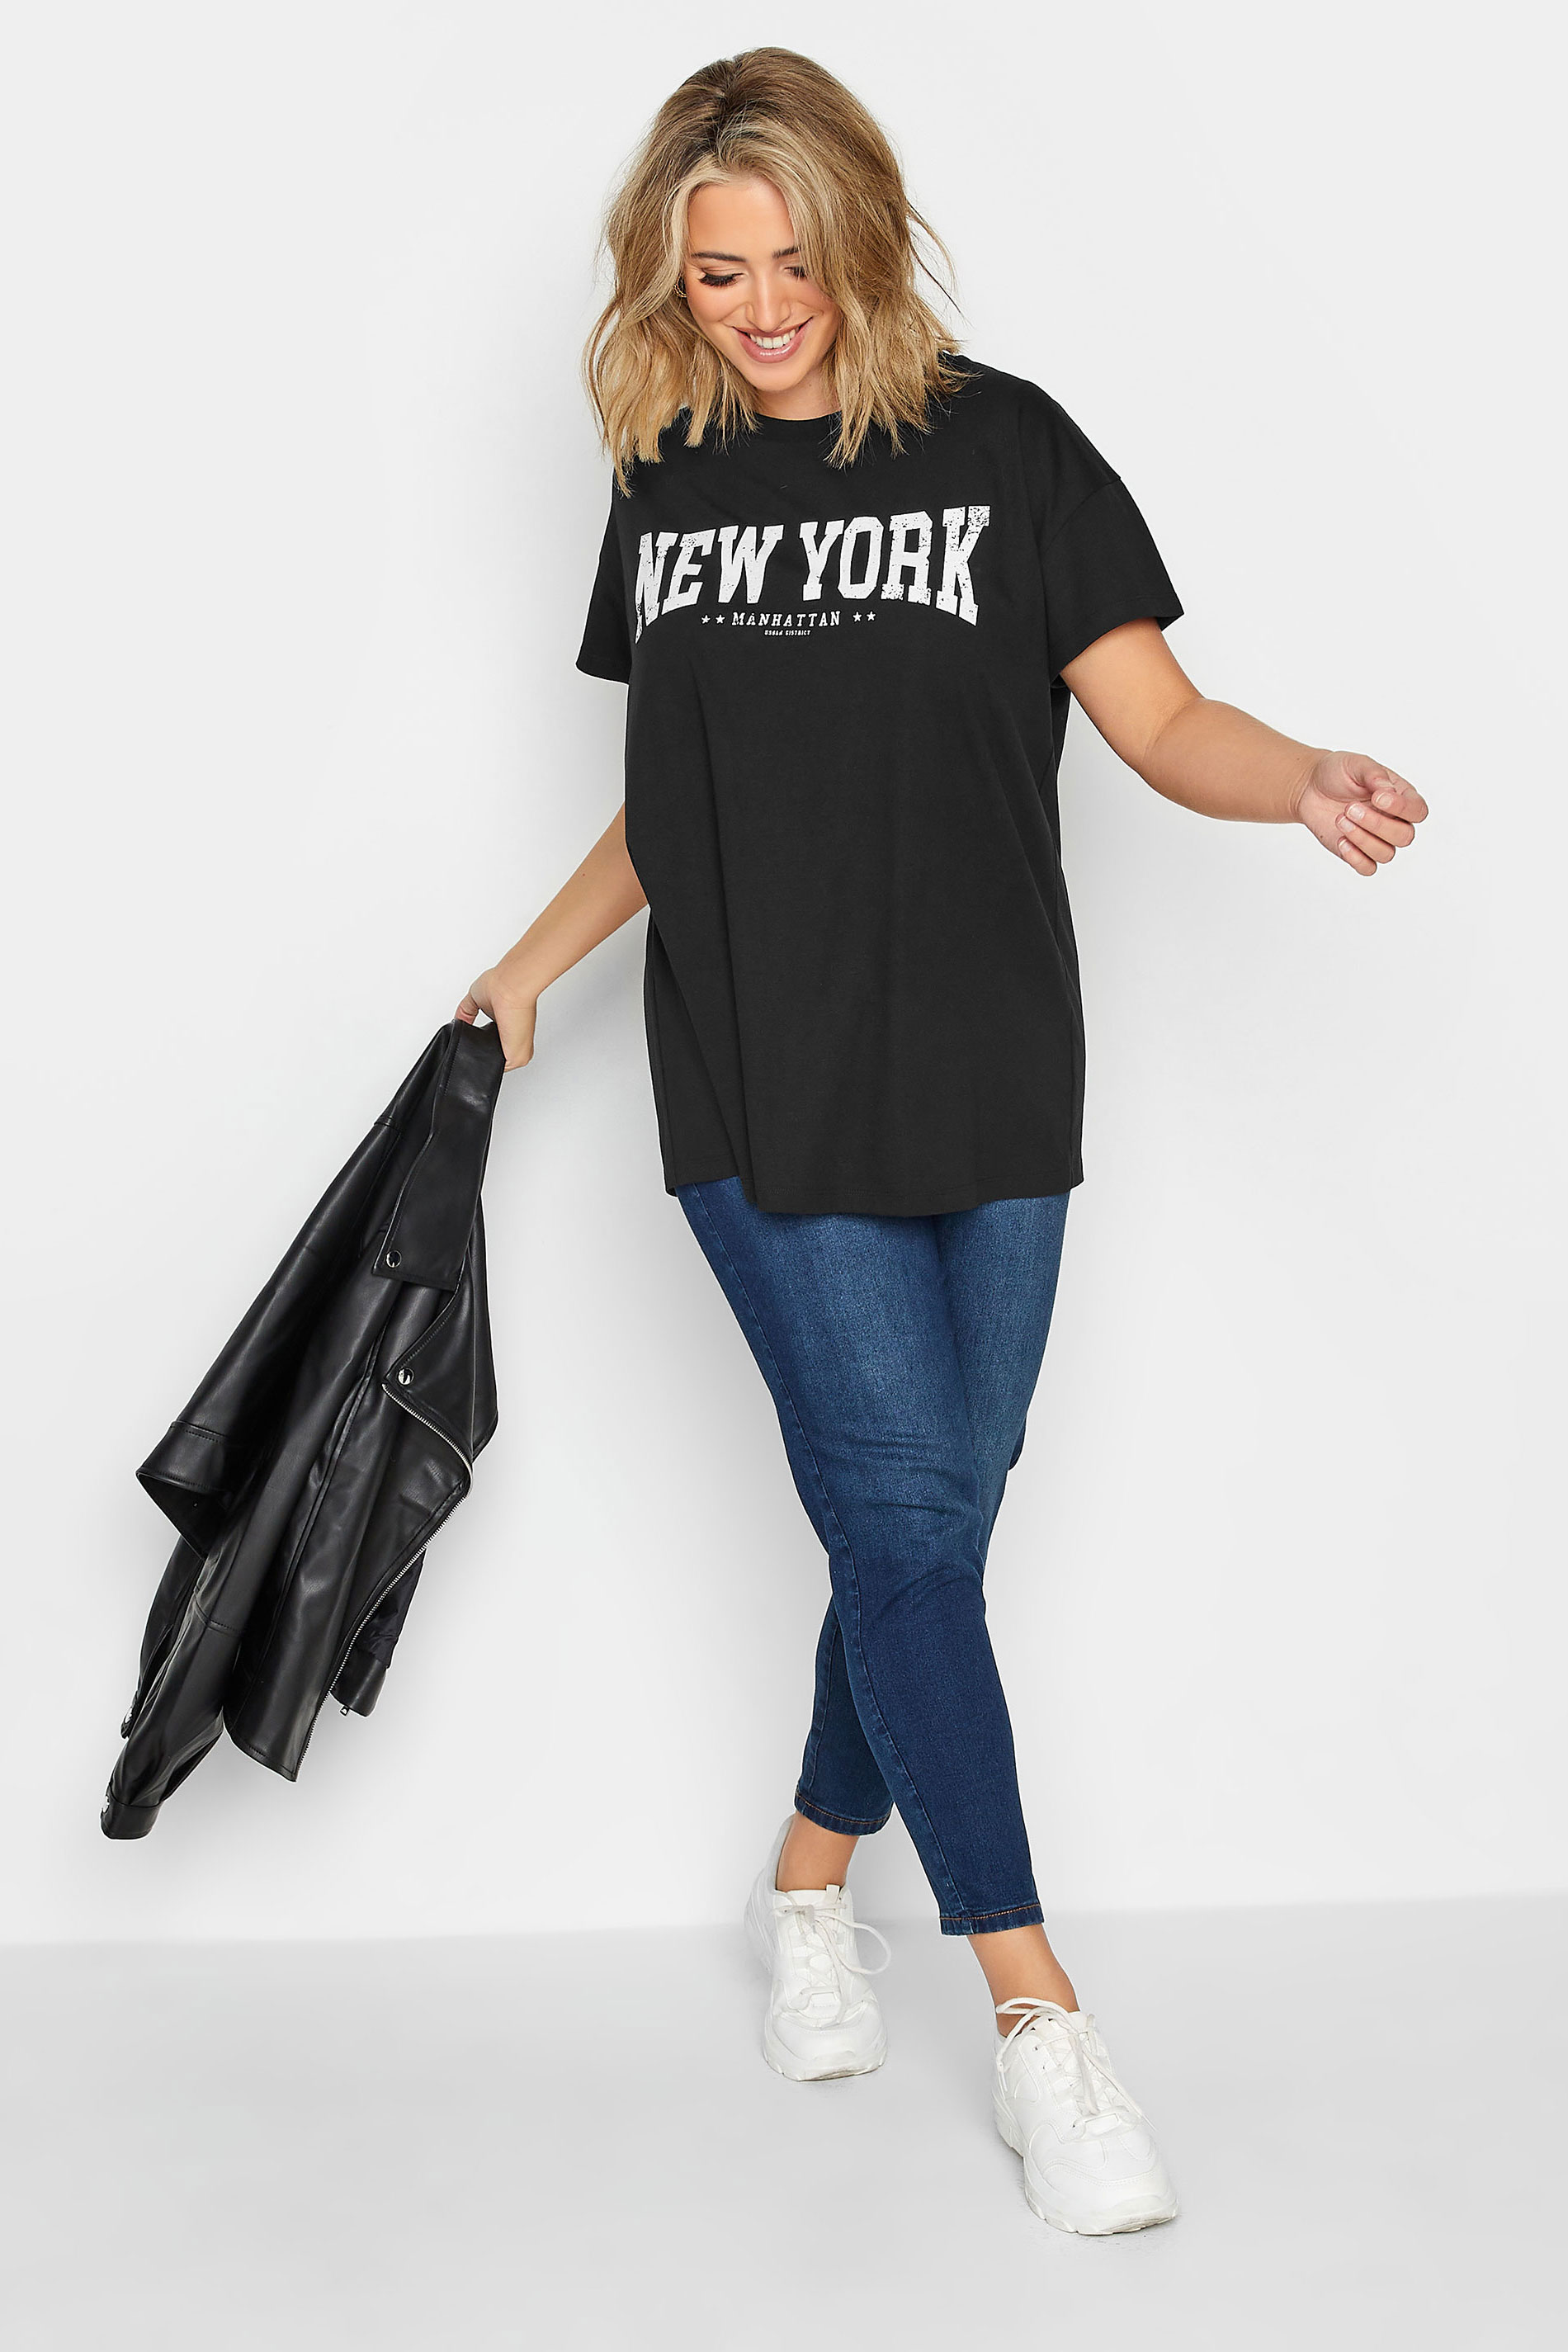 YOURS Plus Size 2 PACK Black & Blue 'New York' & 'Boston' Slogan T-Shirts | Yours Clothing 3